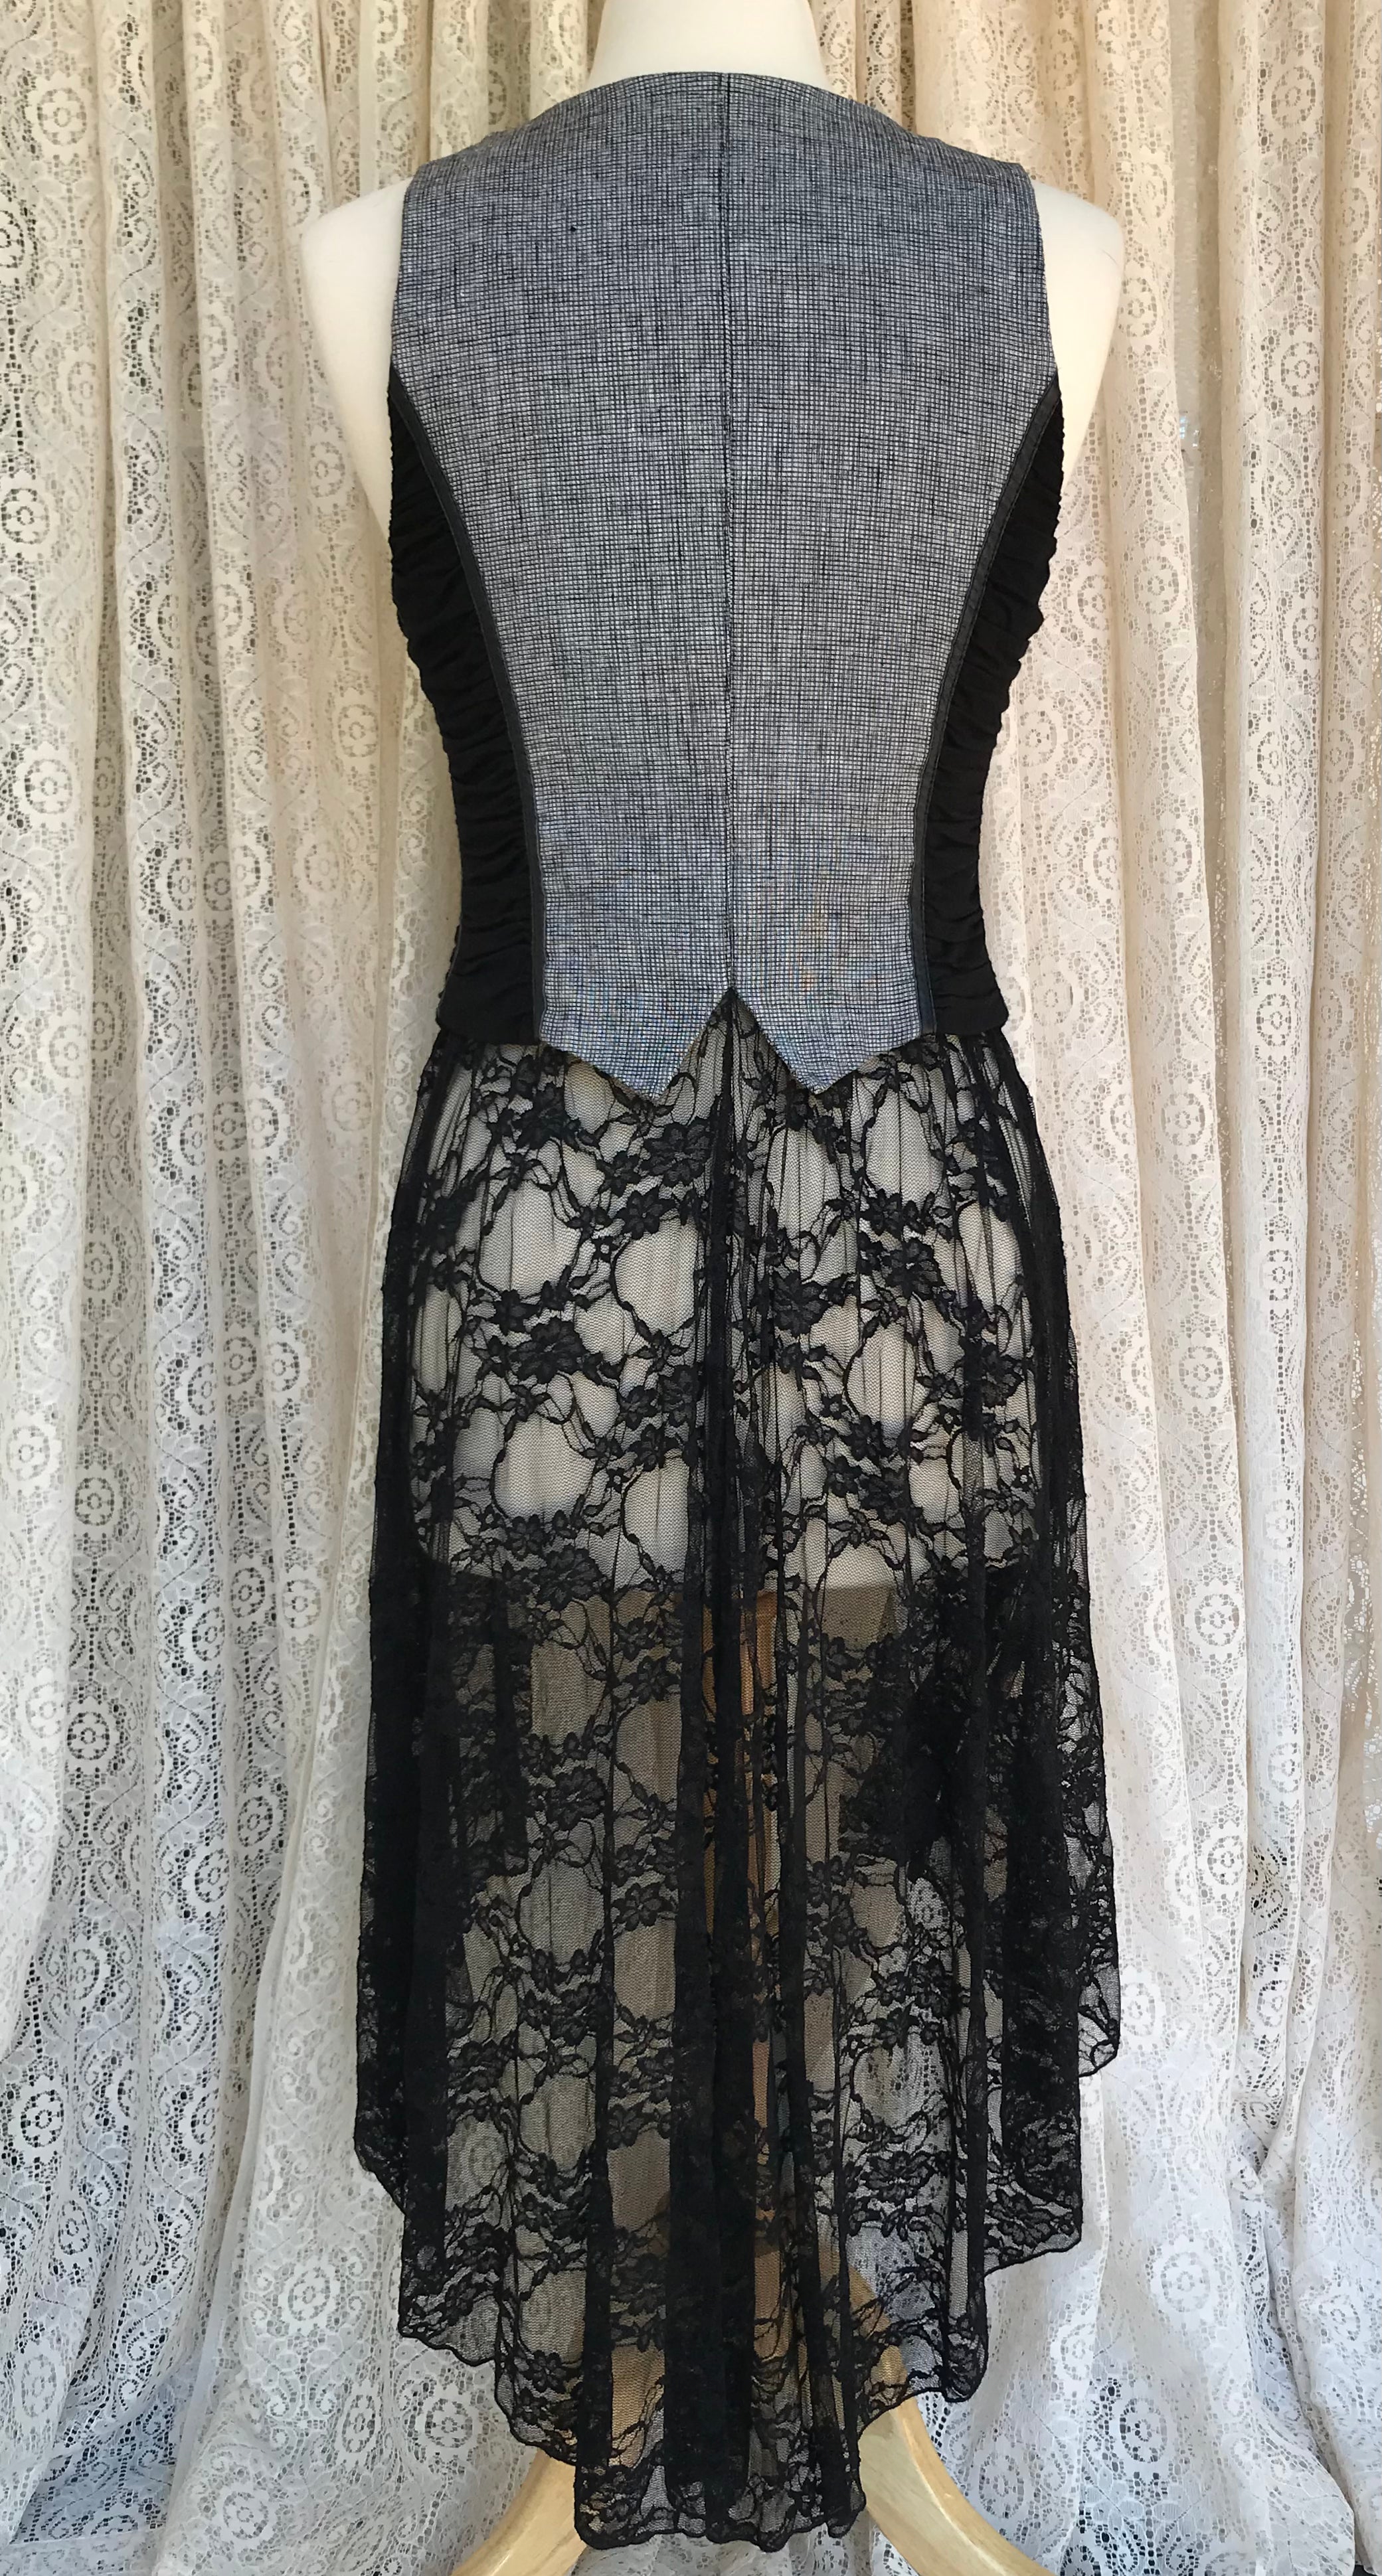 Ladies Vest With Lace Skirt -SMALL